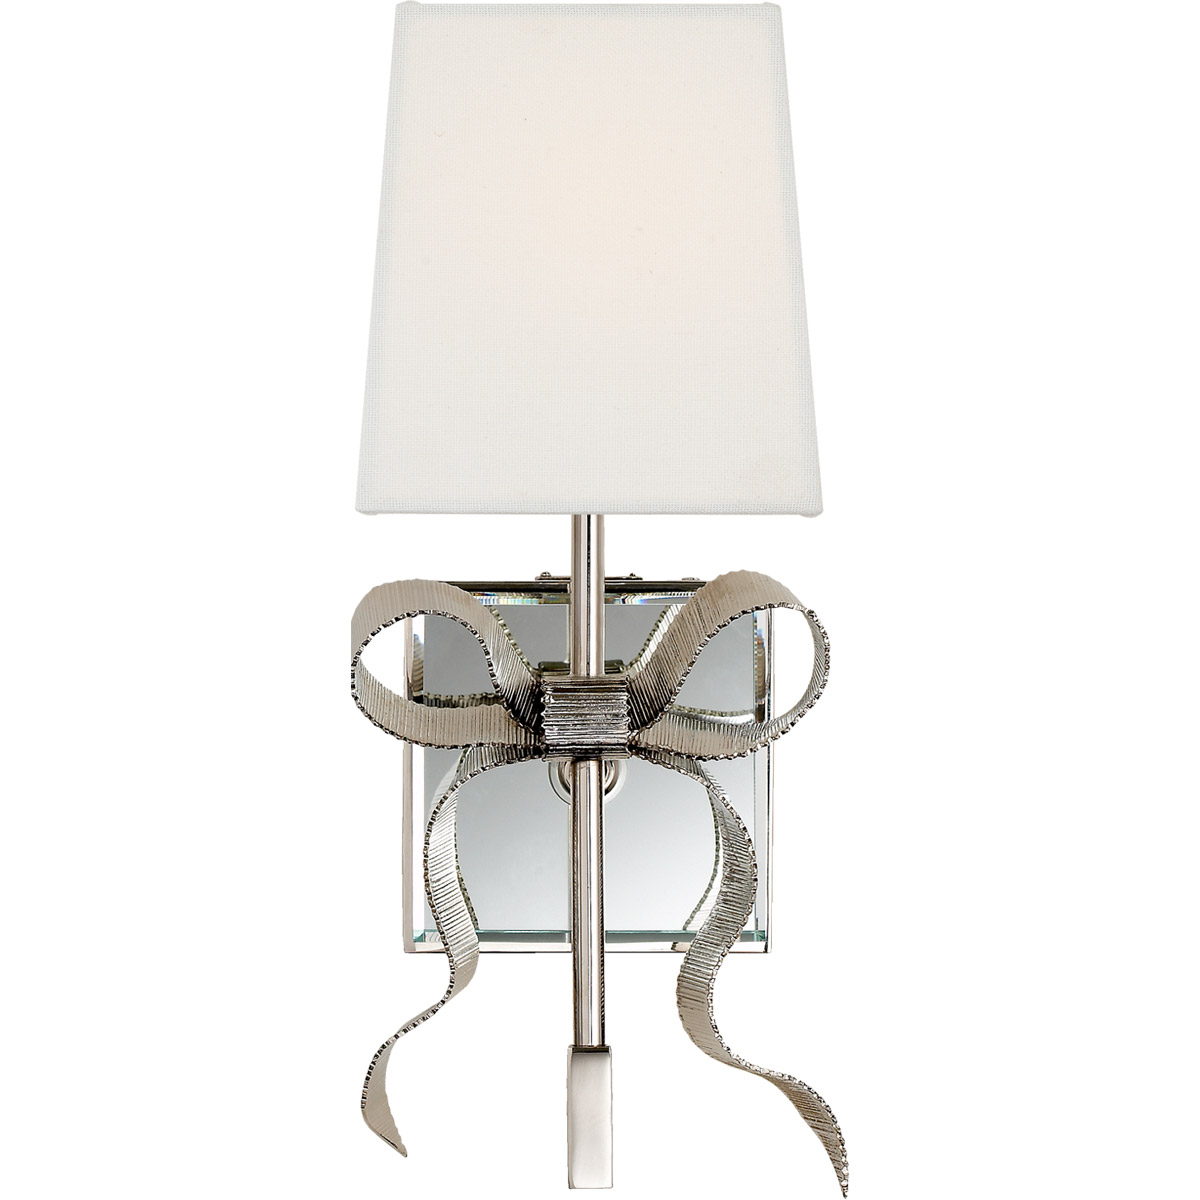 KS2008PN-L Gros-Grain Collection york Visual Comfort Light Ellery Sconce spade kate Bow Visual inch 5 | Nickel Linen, Light Small Cream Comfort Polished new Wall 1 in Signature